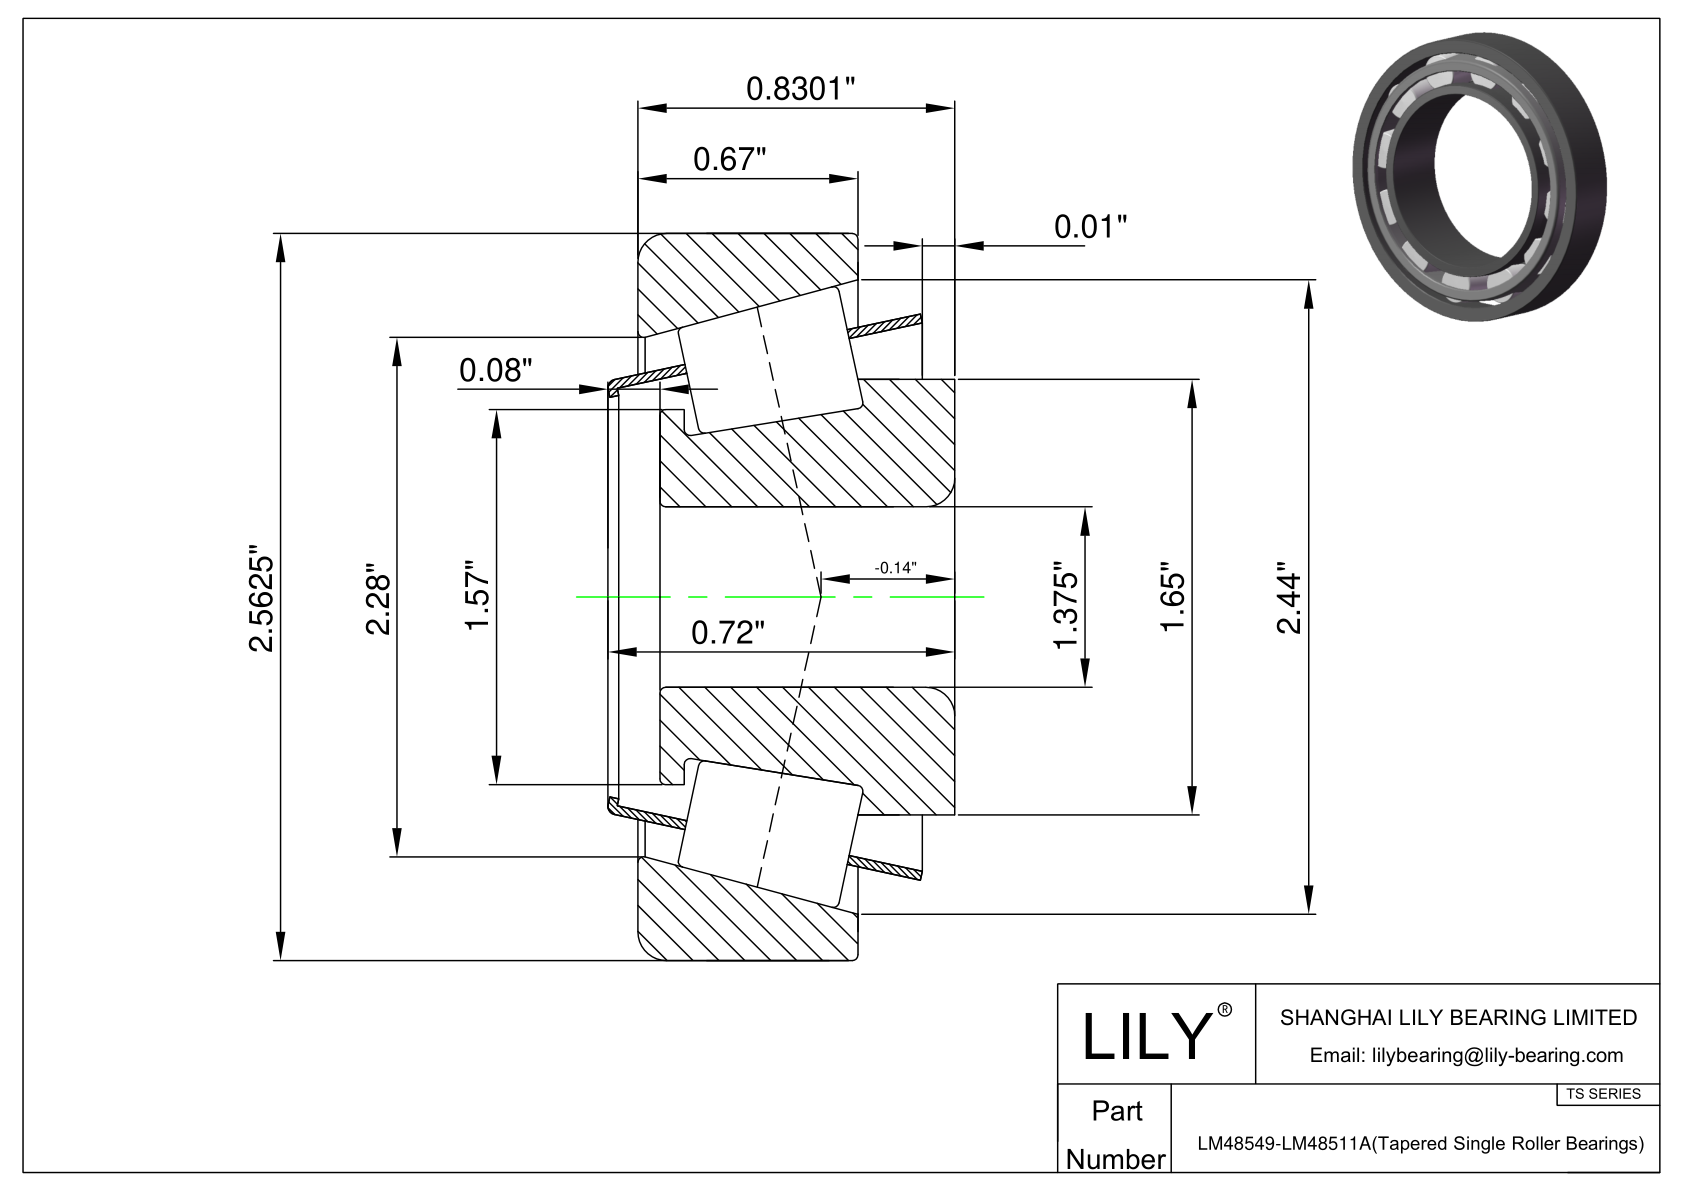 LM48549-LM48511A TS (Tapered Single Roller Bearings) (Imperial) cad drawing